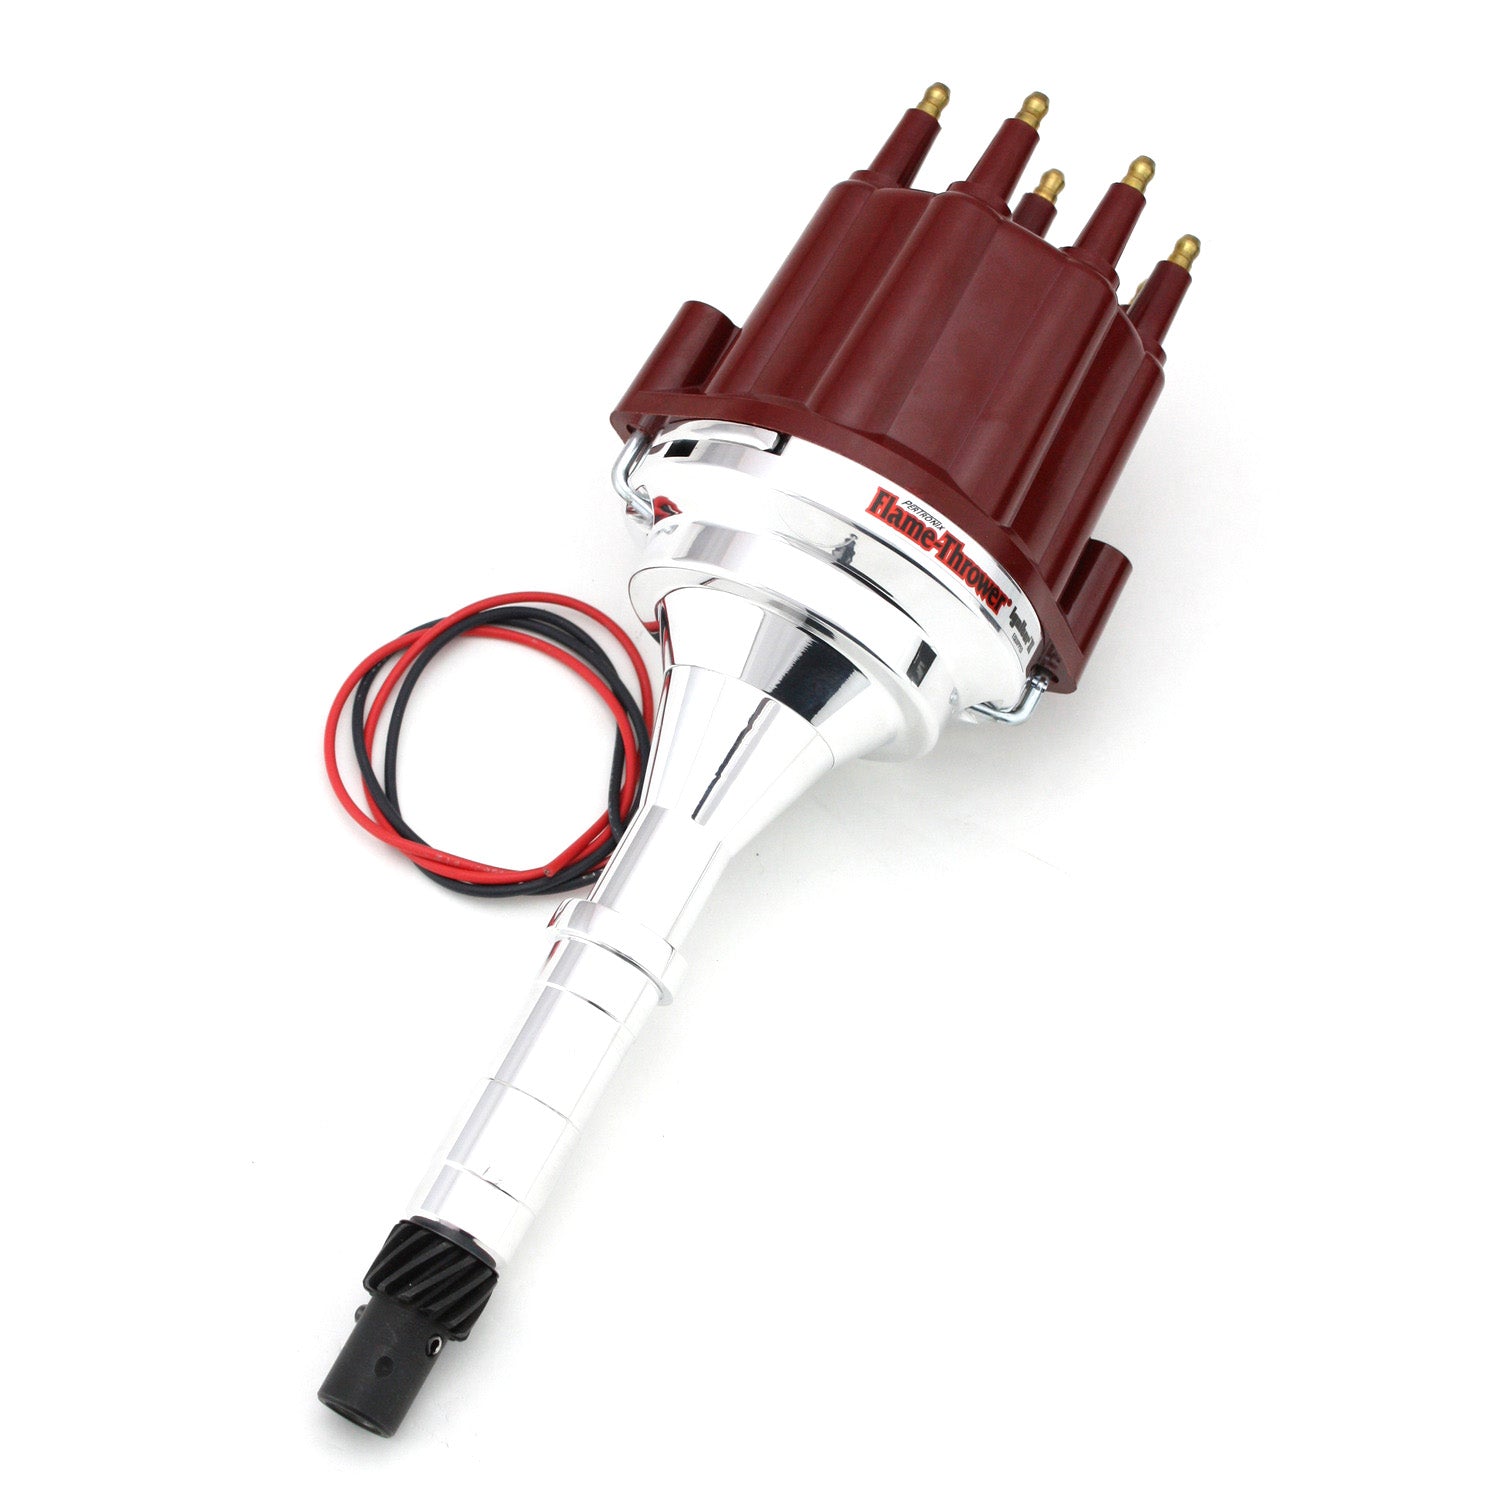 PerTronix D160811 Flame-Thrower Electronic Distributor Billet AMC V8 Plug and Play with Ignitor II Technology Non Vacuum Advance Red Male Cap